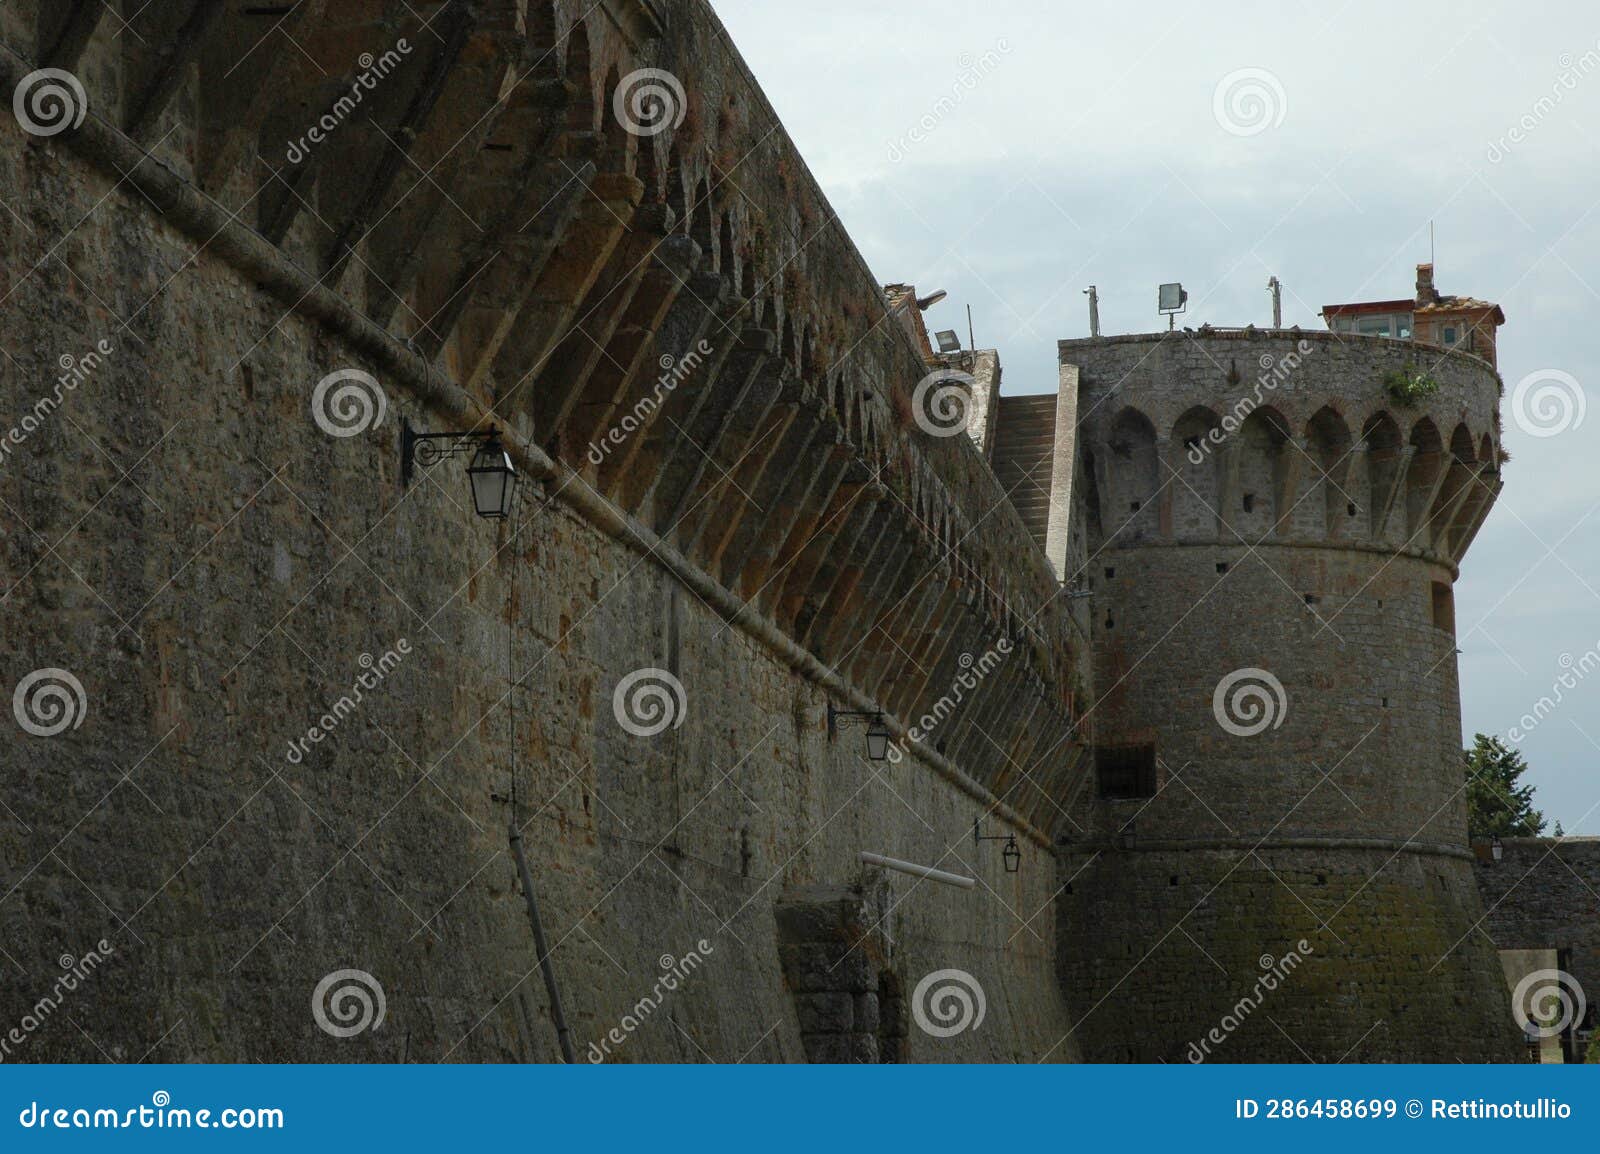 view of the walls and one of the towers of the medici fortress in volterra